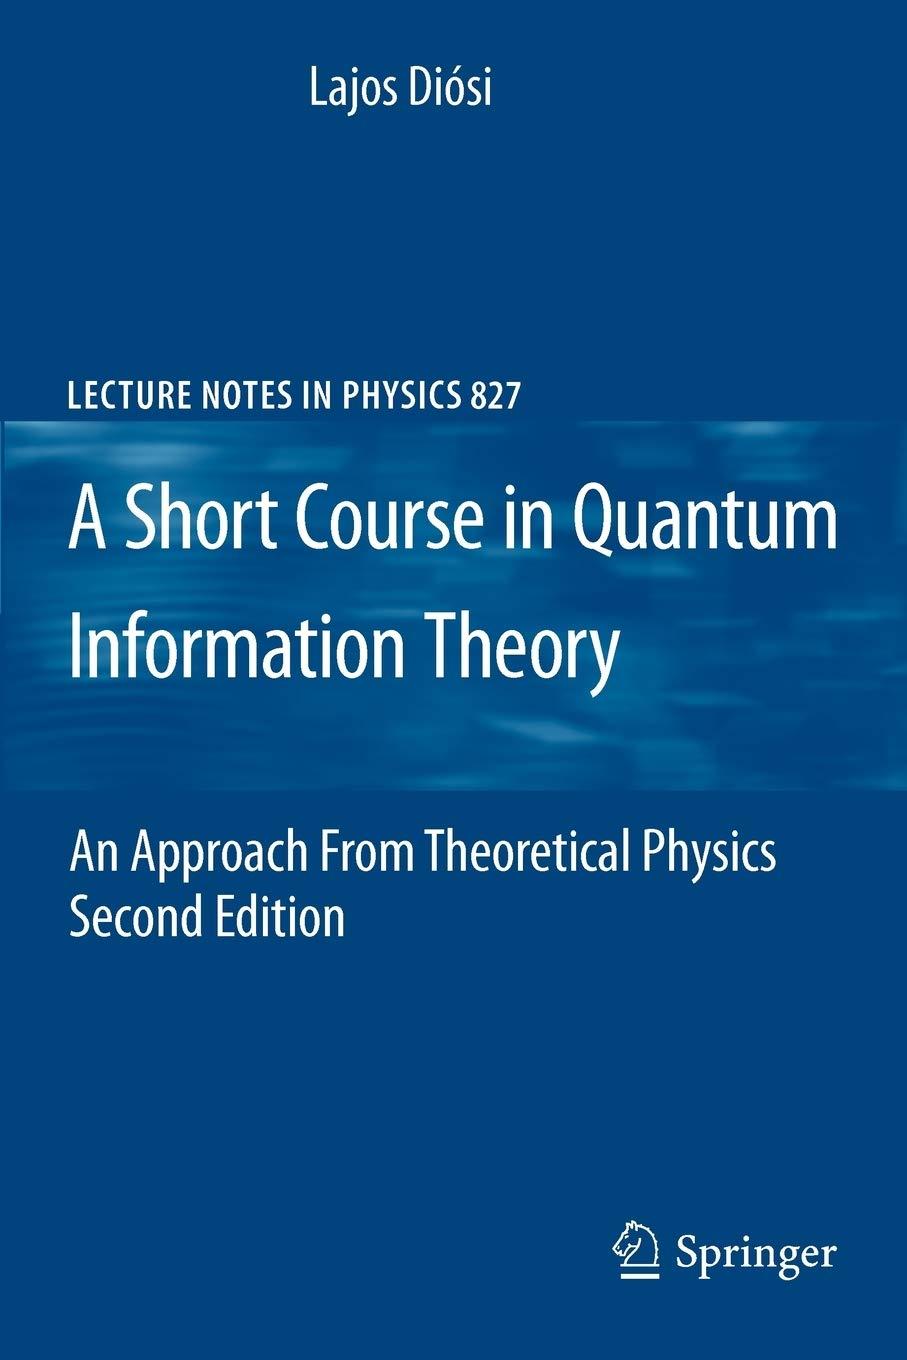 a short course in quantum information theory an approach from theoretical physics 2nd edition lajos diosi